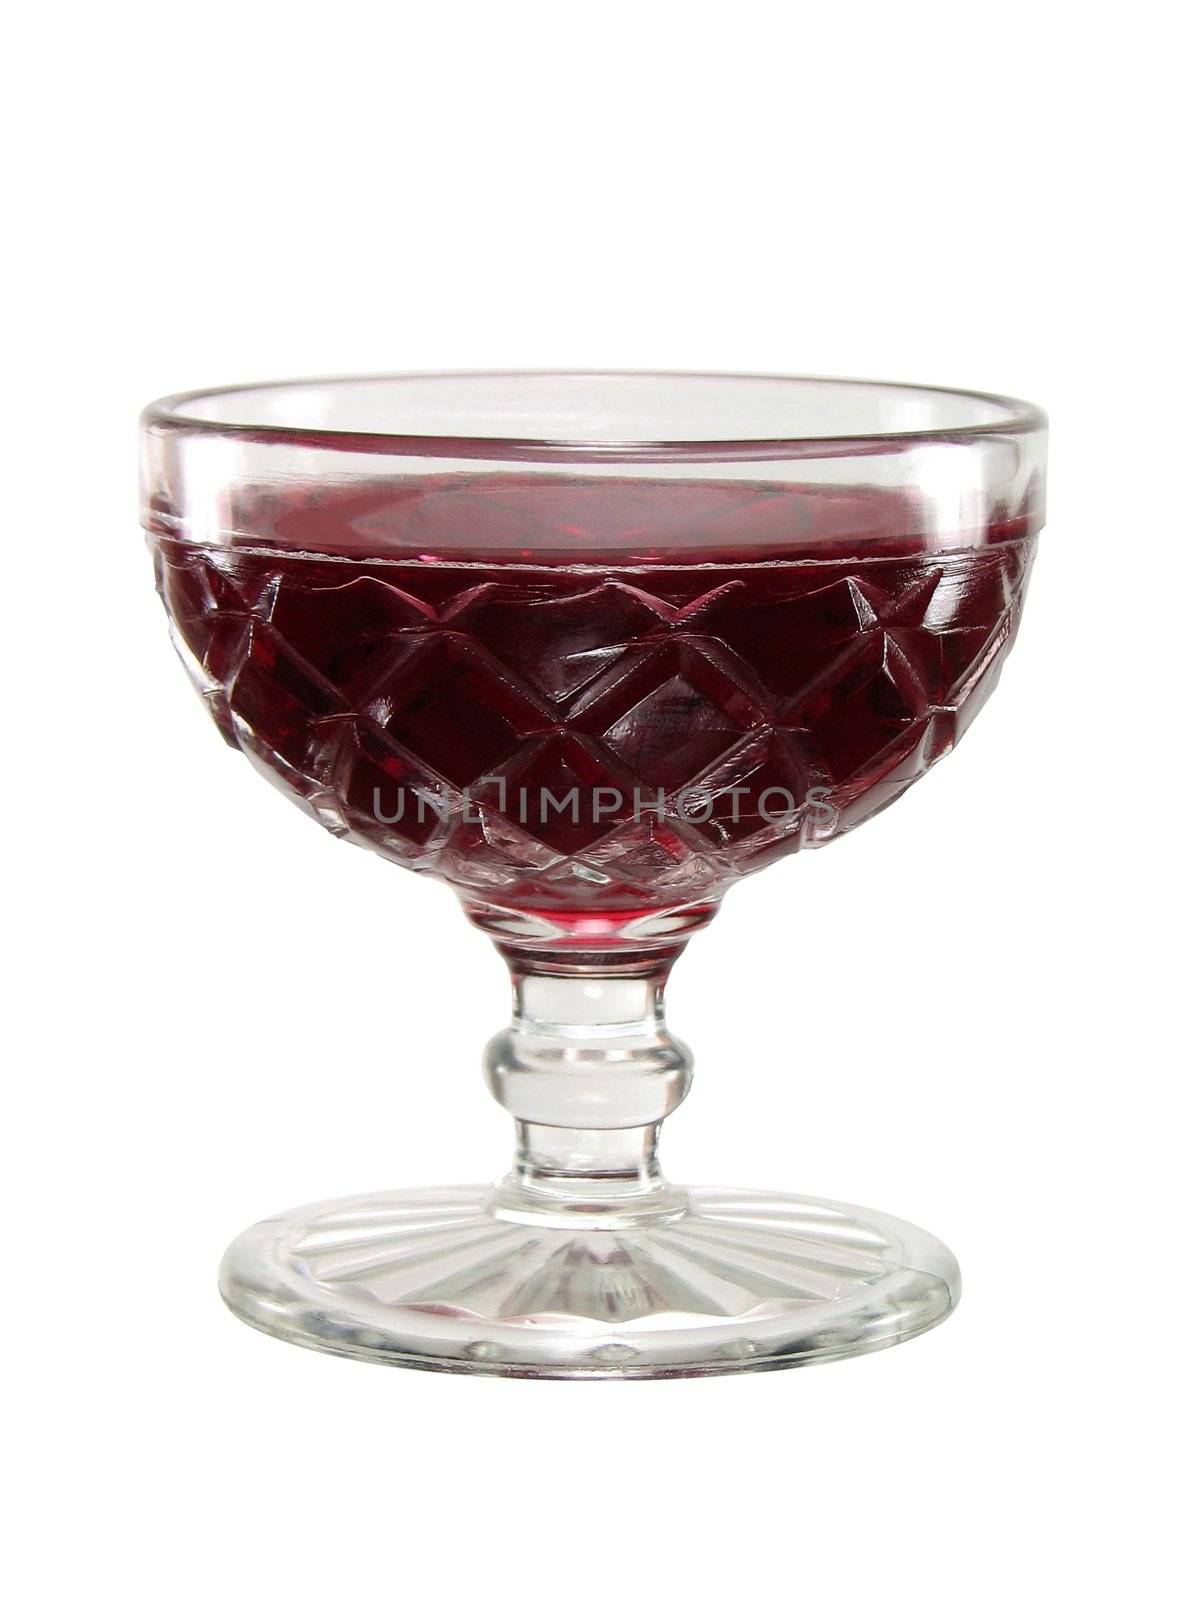 Sweet red jelly dessert in an old fashioned glass bowl.